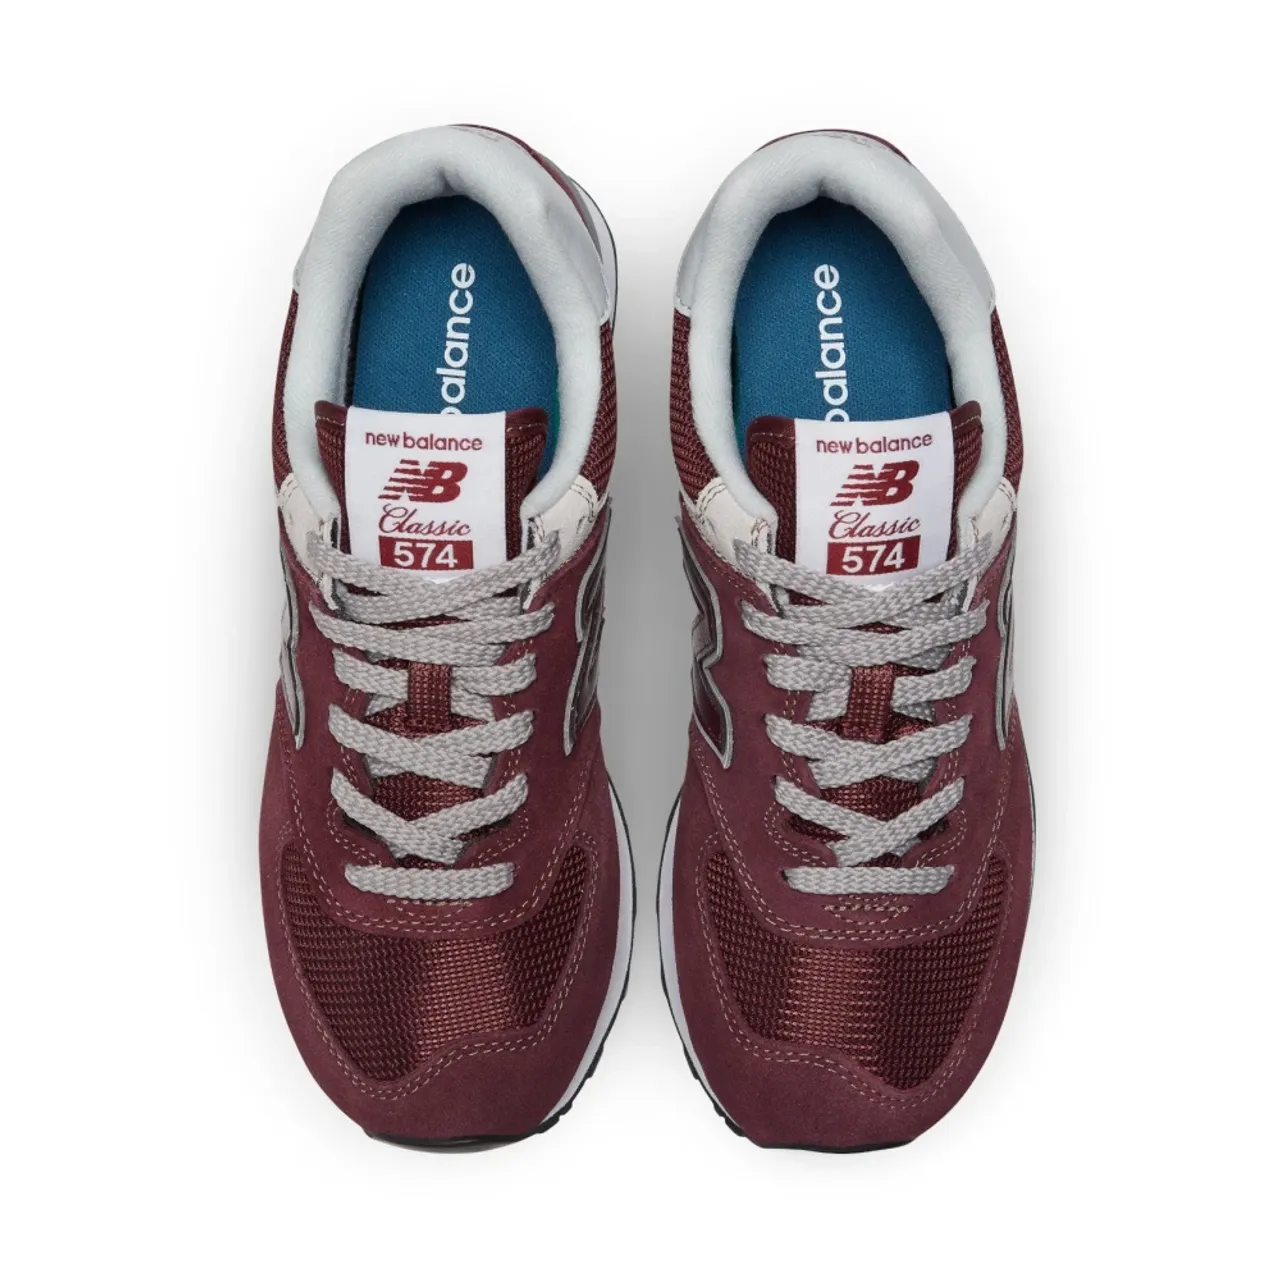 New Balance , Bordeaux 574 Suede Sneaker ,Red female, Sizes: